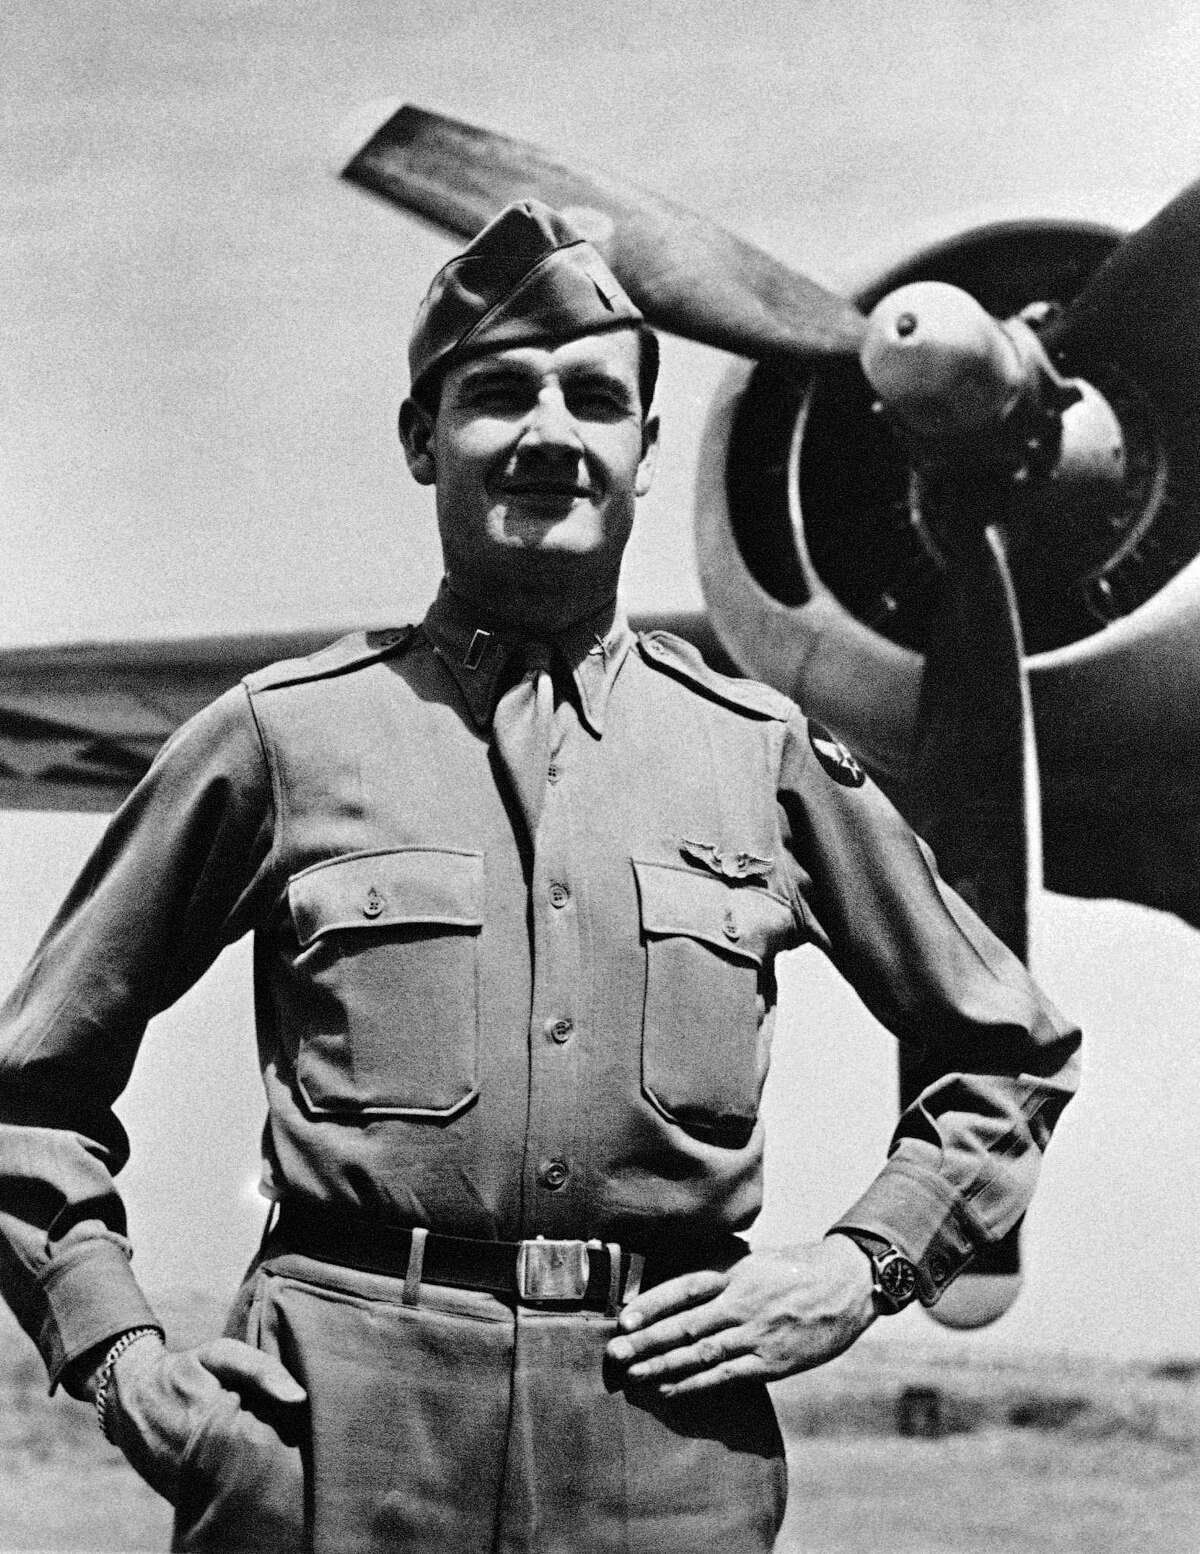 This 1944 photo shows George McGovern when he received the Distinguished Flying Cross. McGovern died Oct. 21, 2012.